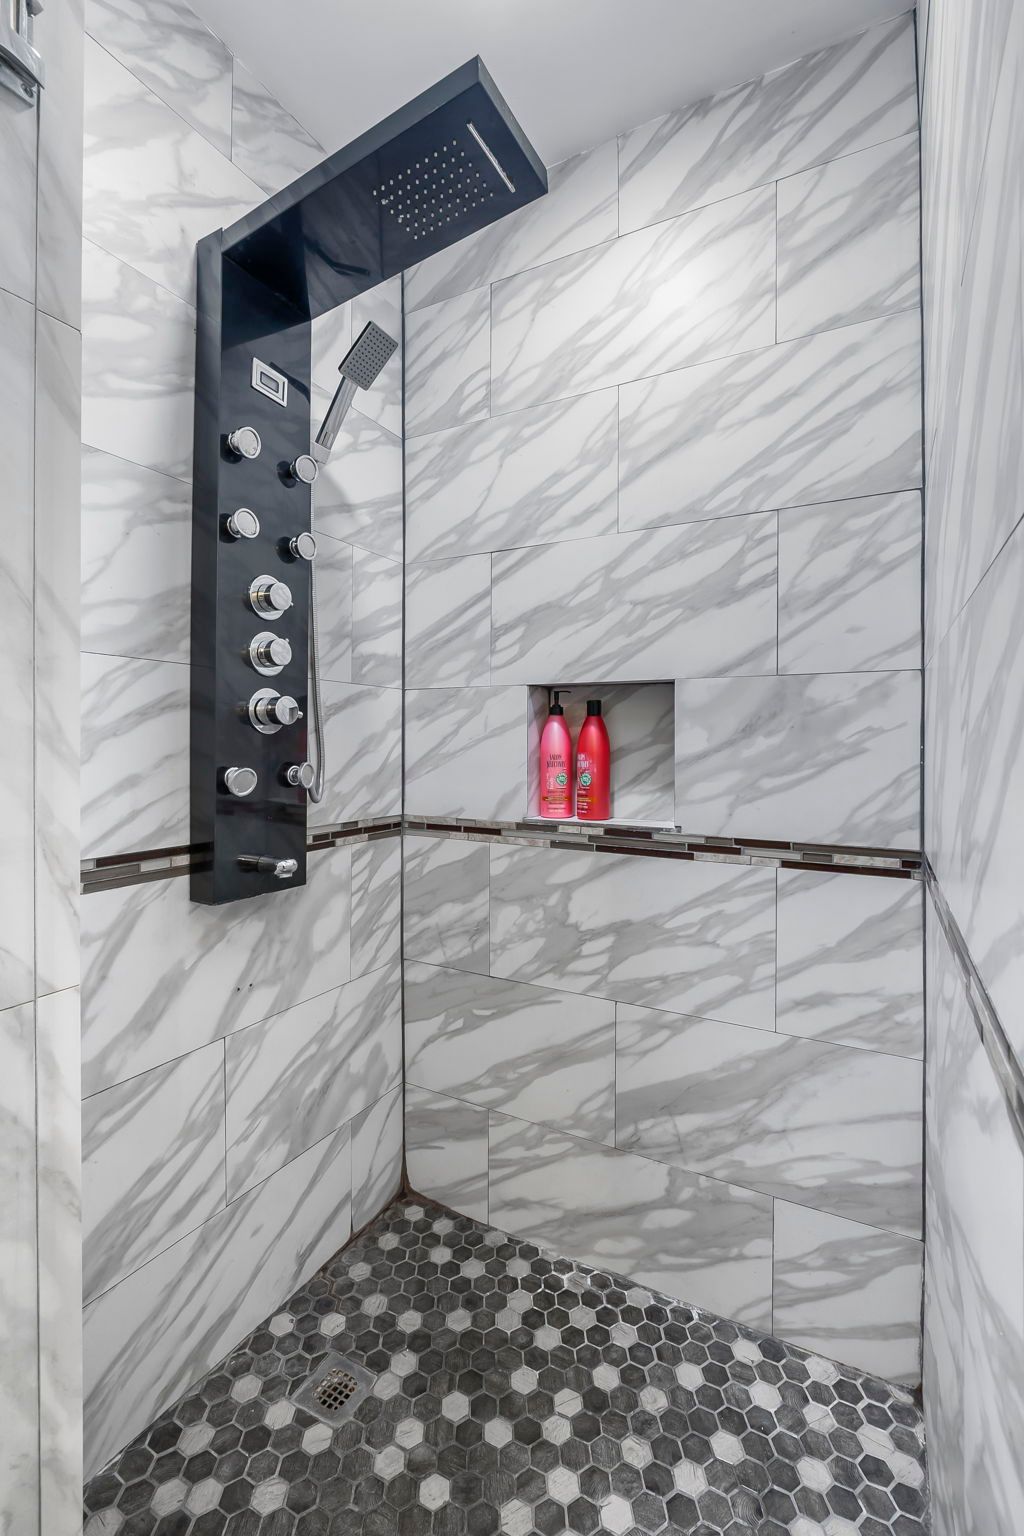 A shower with a black shower head and two bottles of shampoo on a shelf.